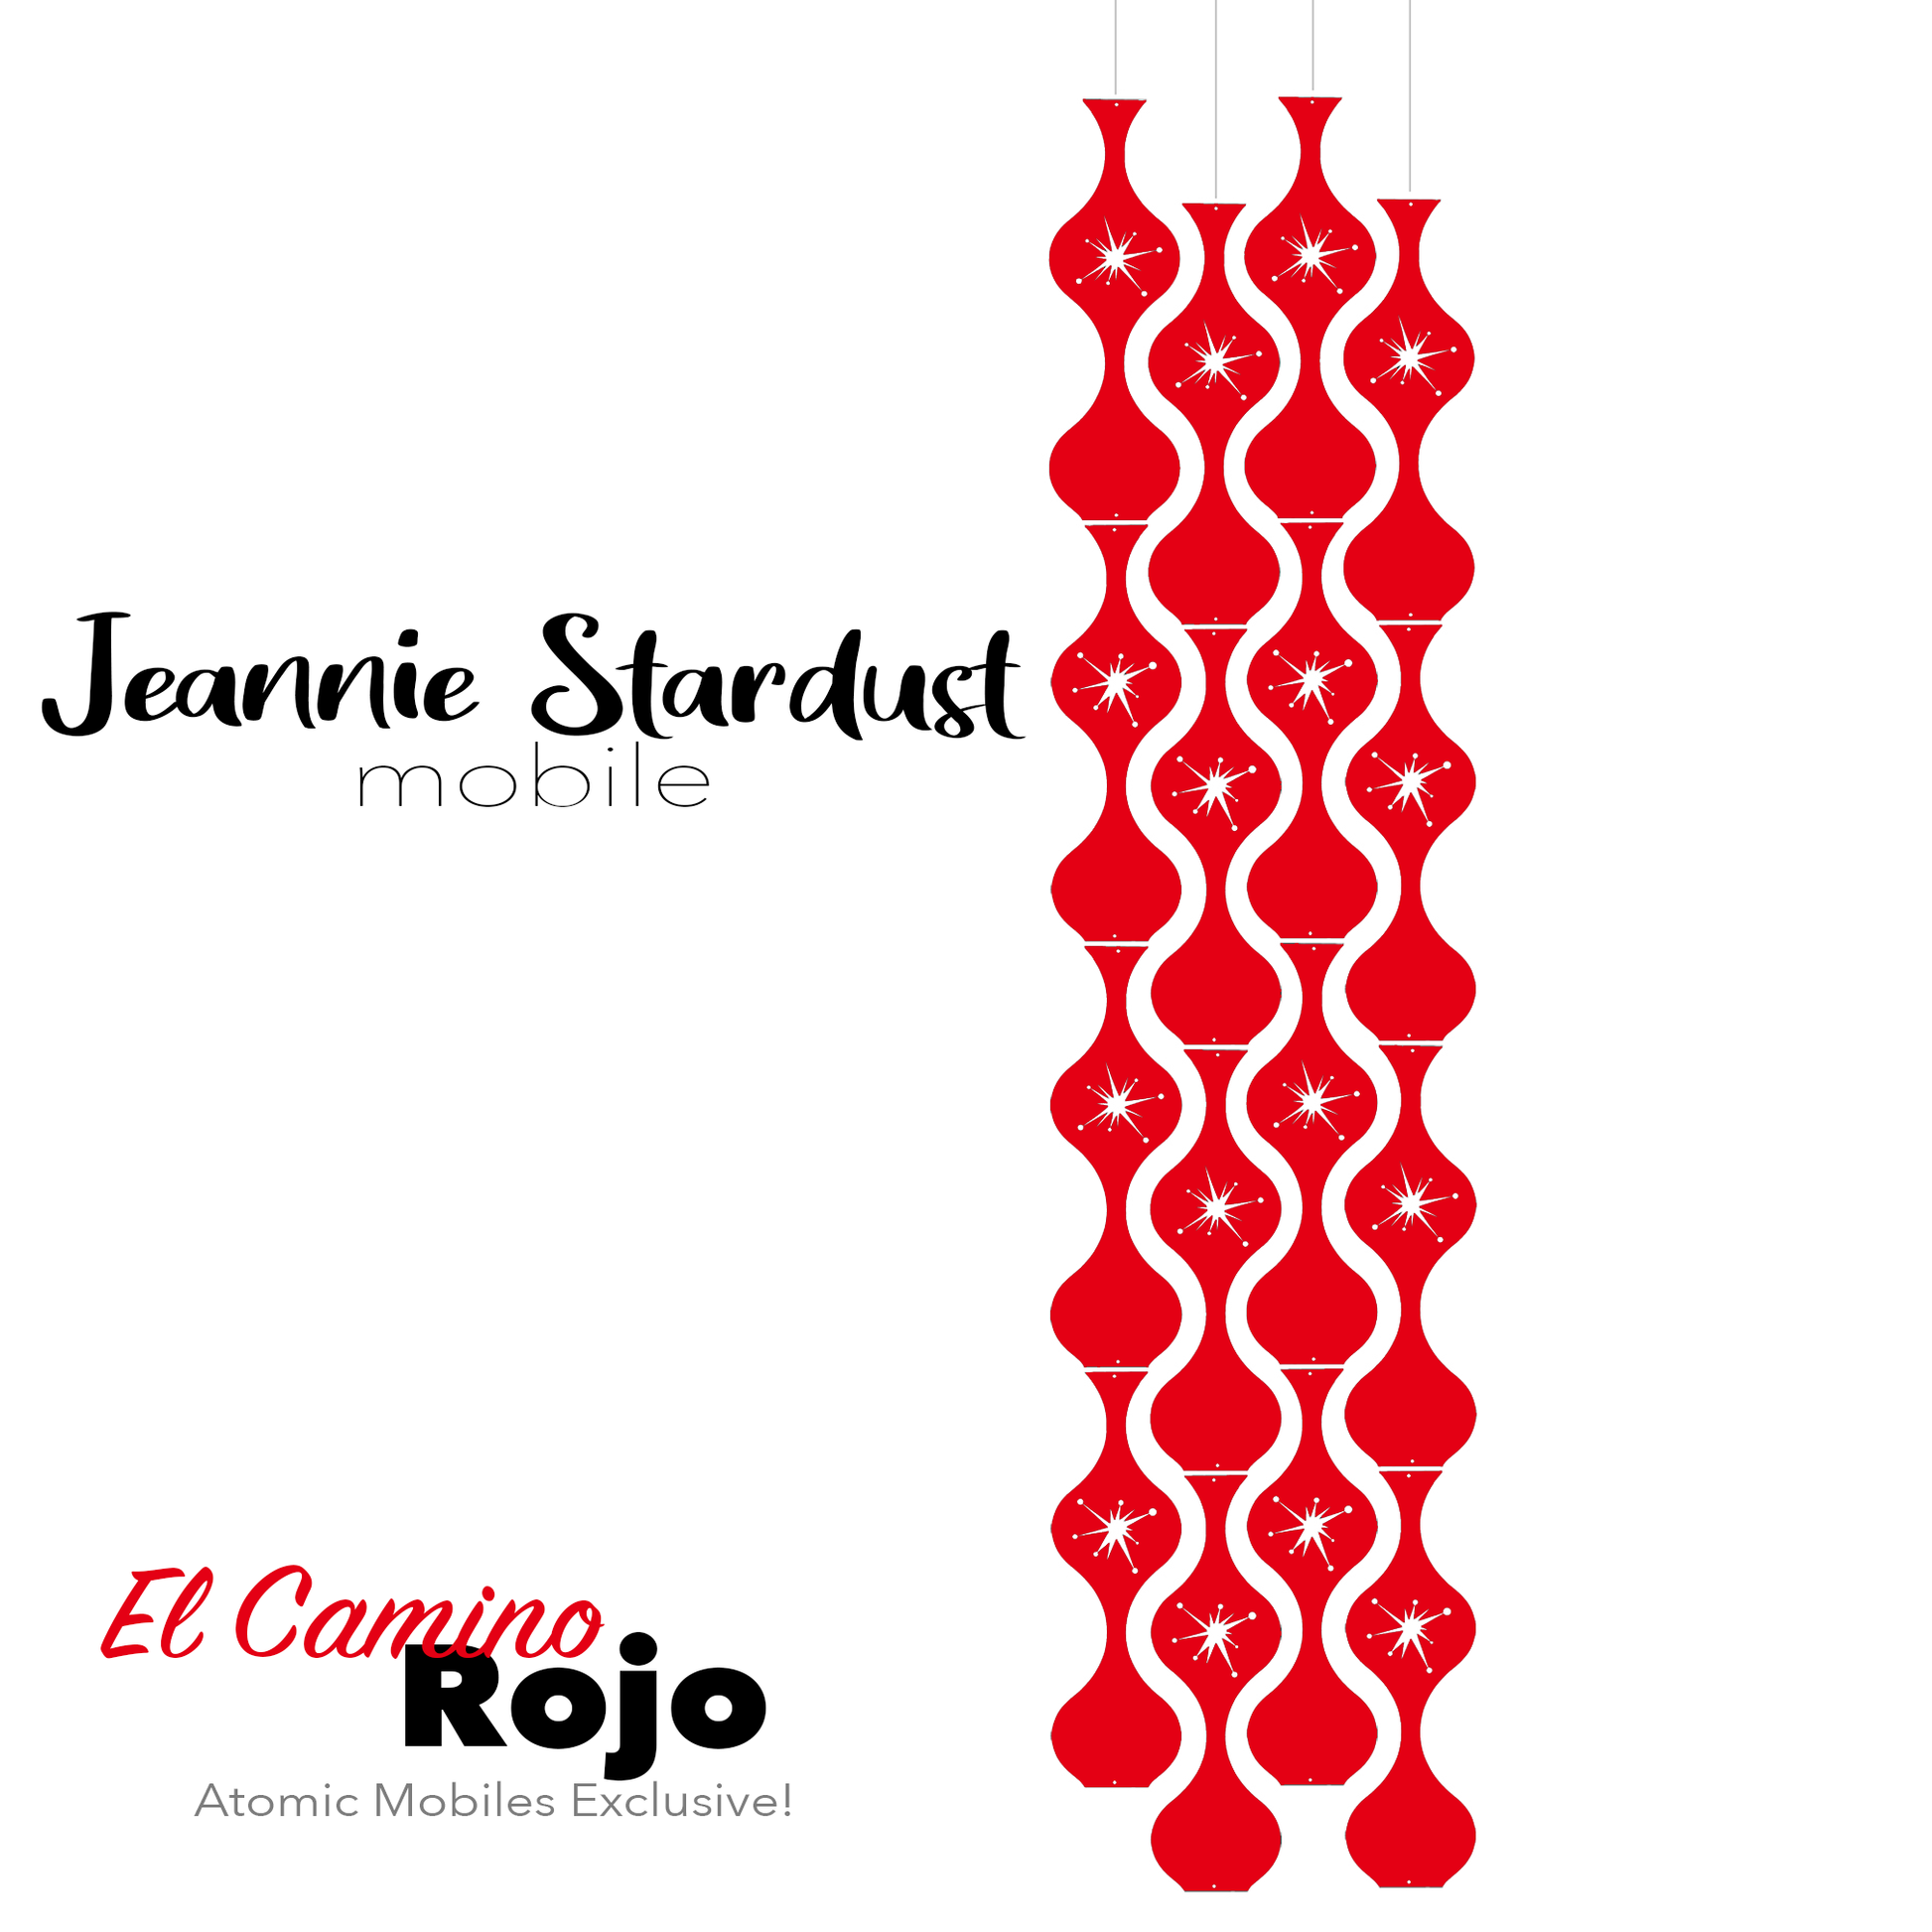 El Camino Rojo Jeannie Stardust Hanging Art Mobile - mid century modern home decor in Red - by AtomicMobiles.com